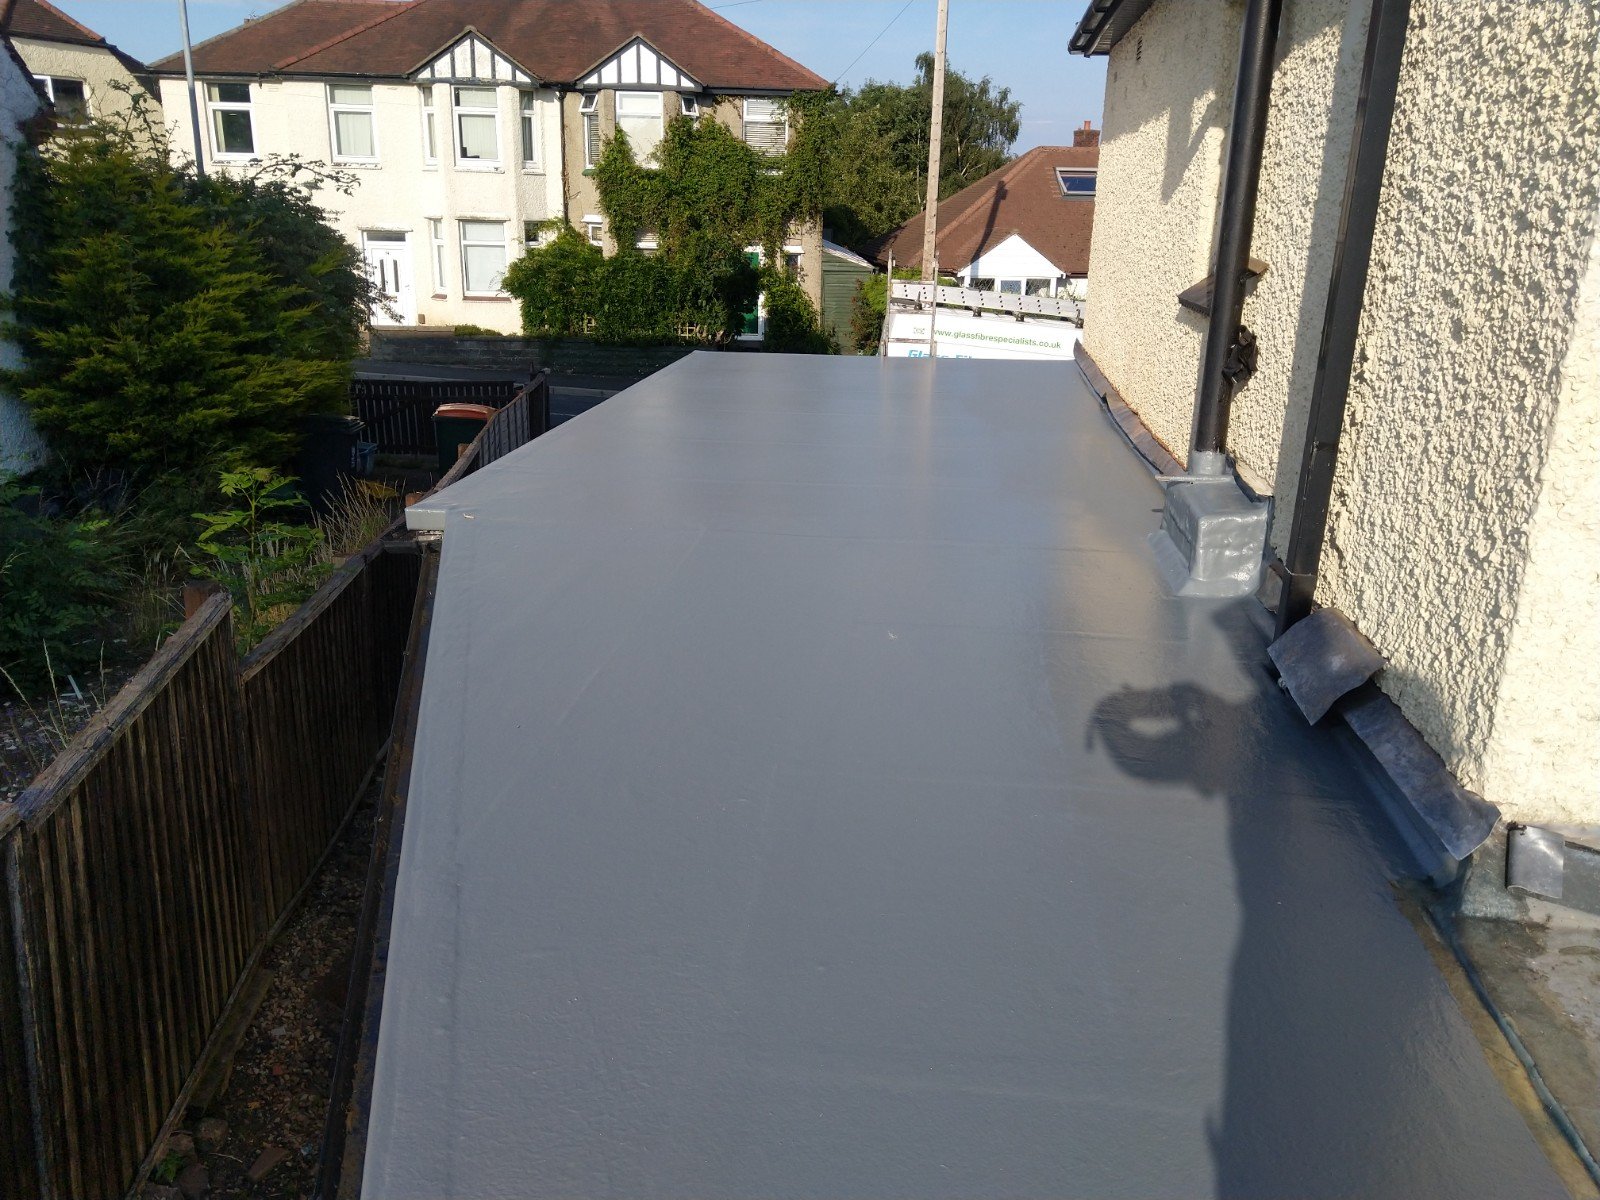 Flat roof in Newport without pooling water.